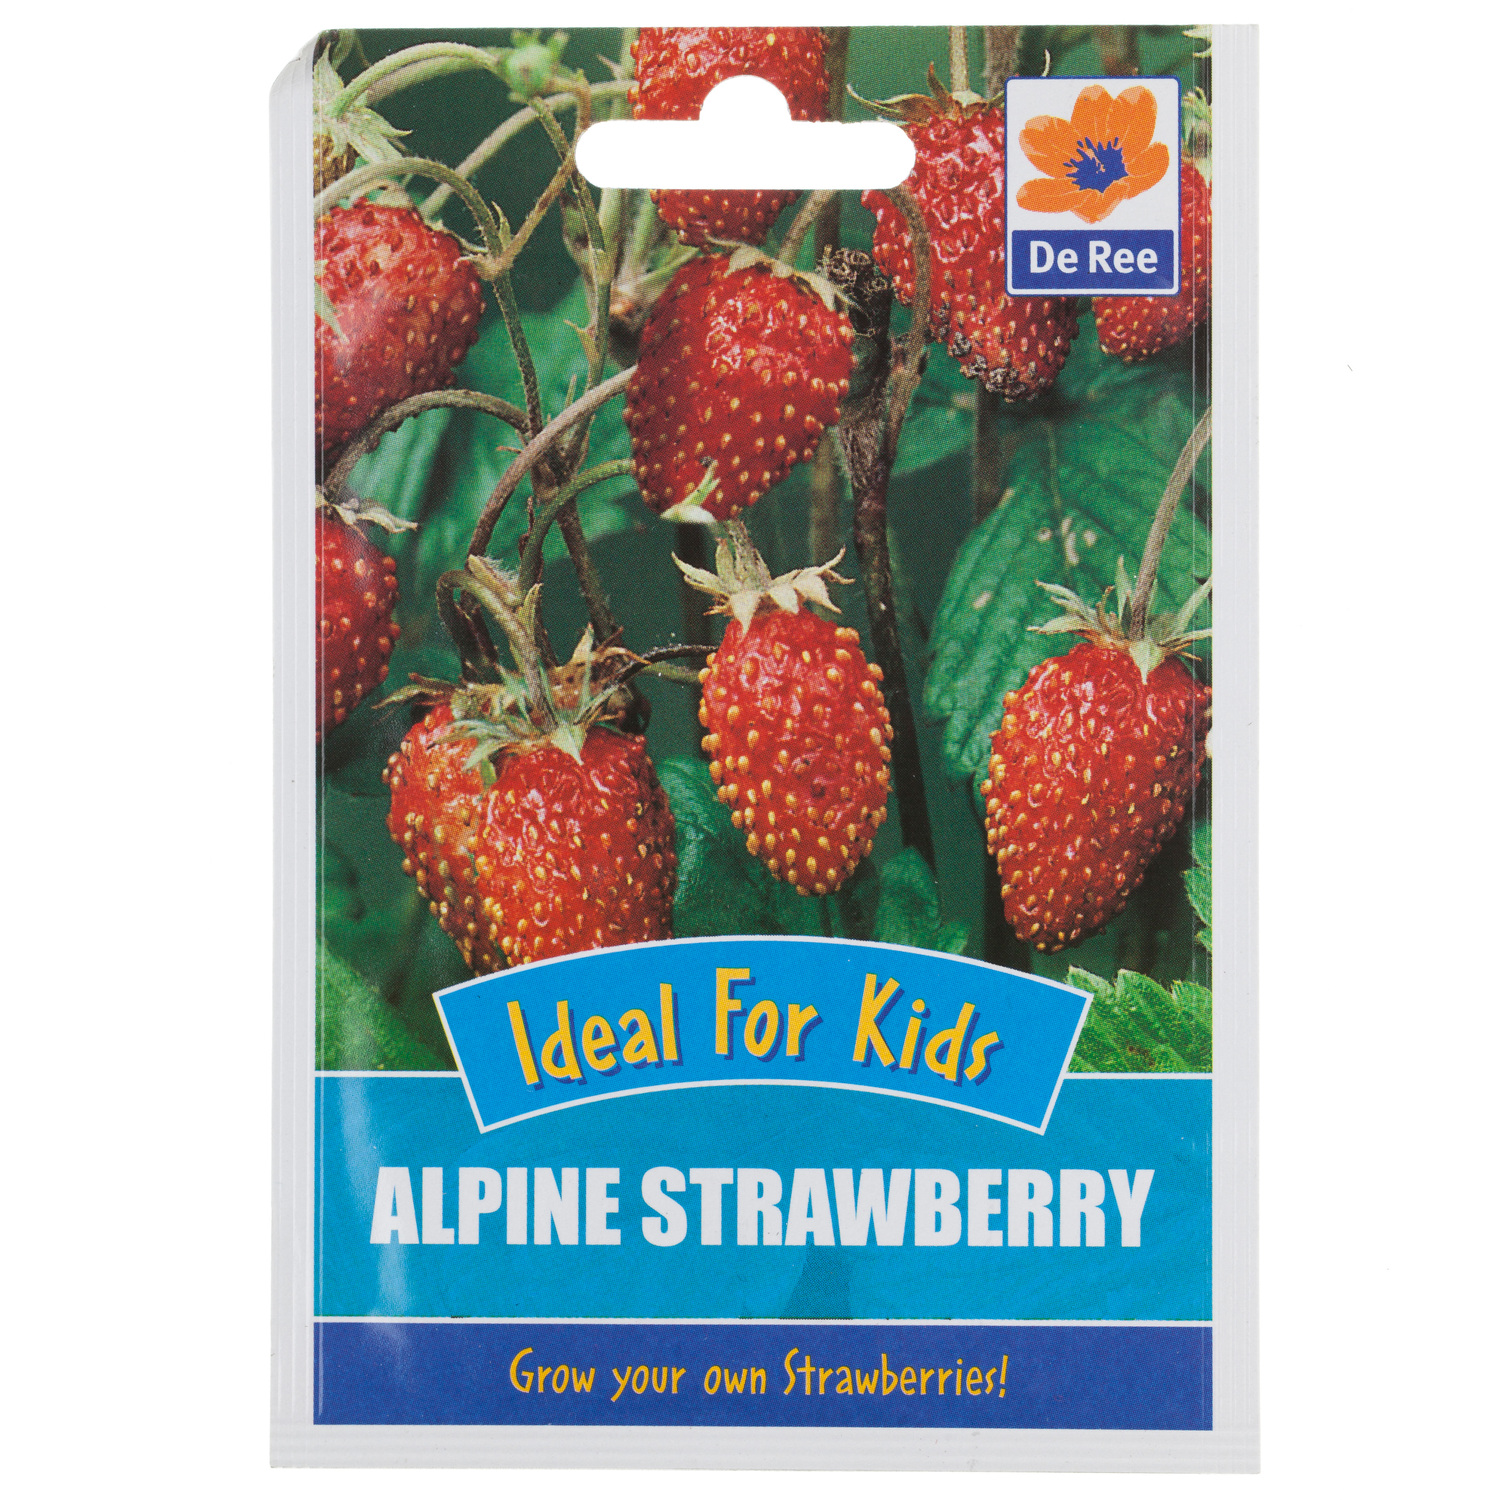 Alpine Strawberry Seed Packet Image